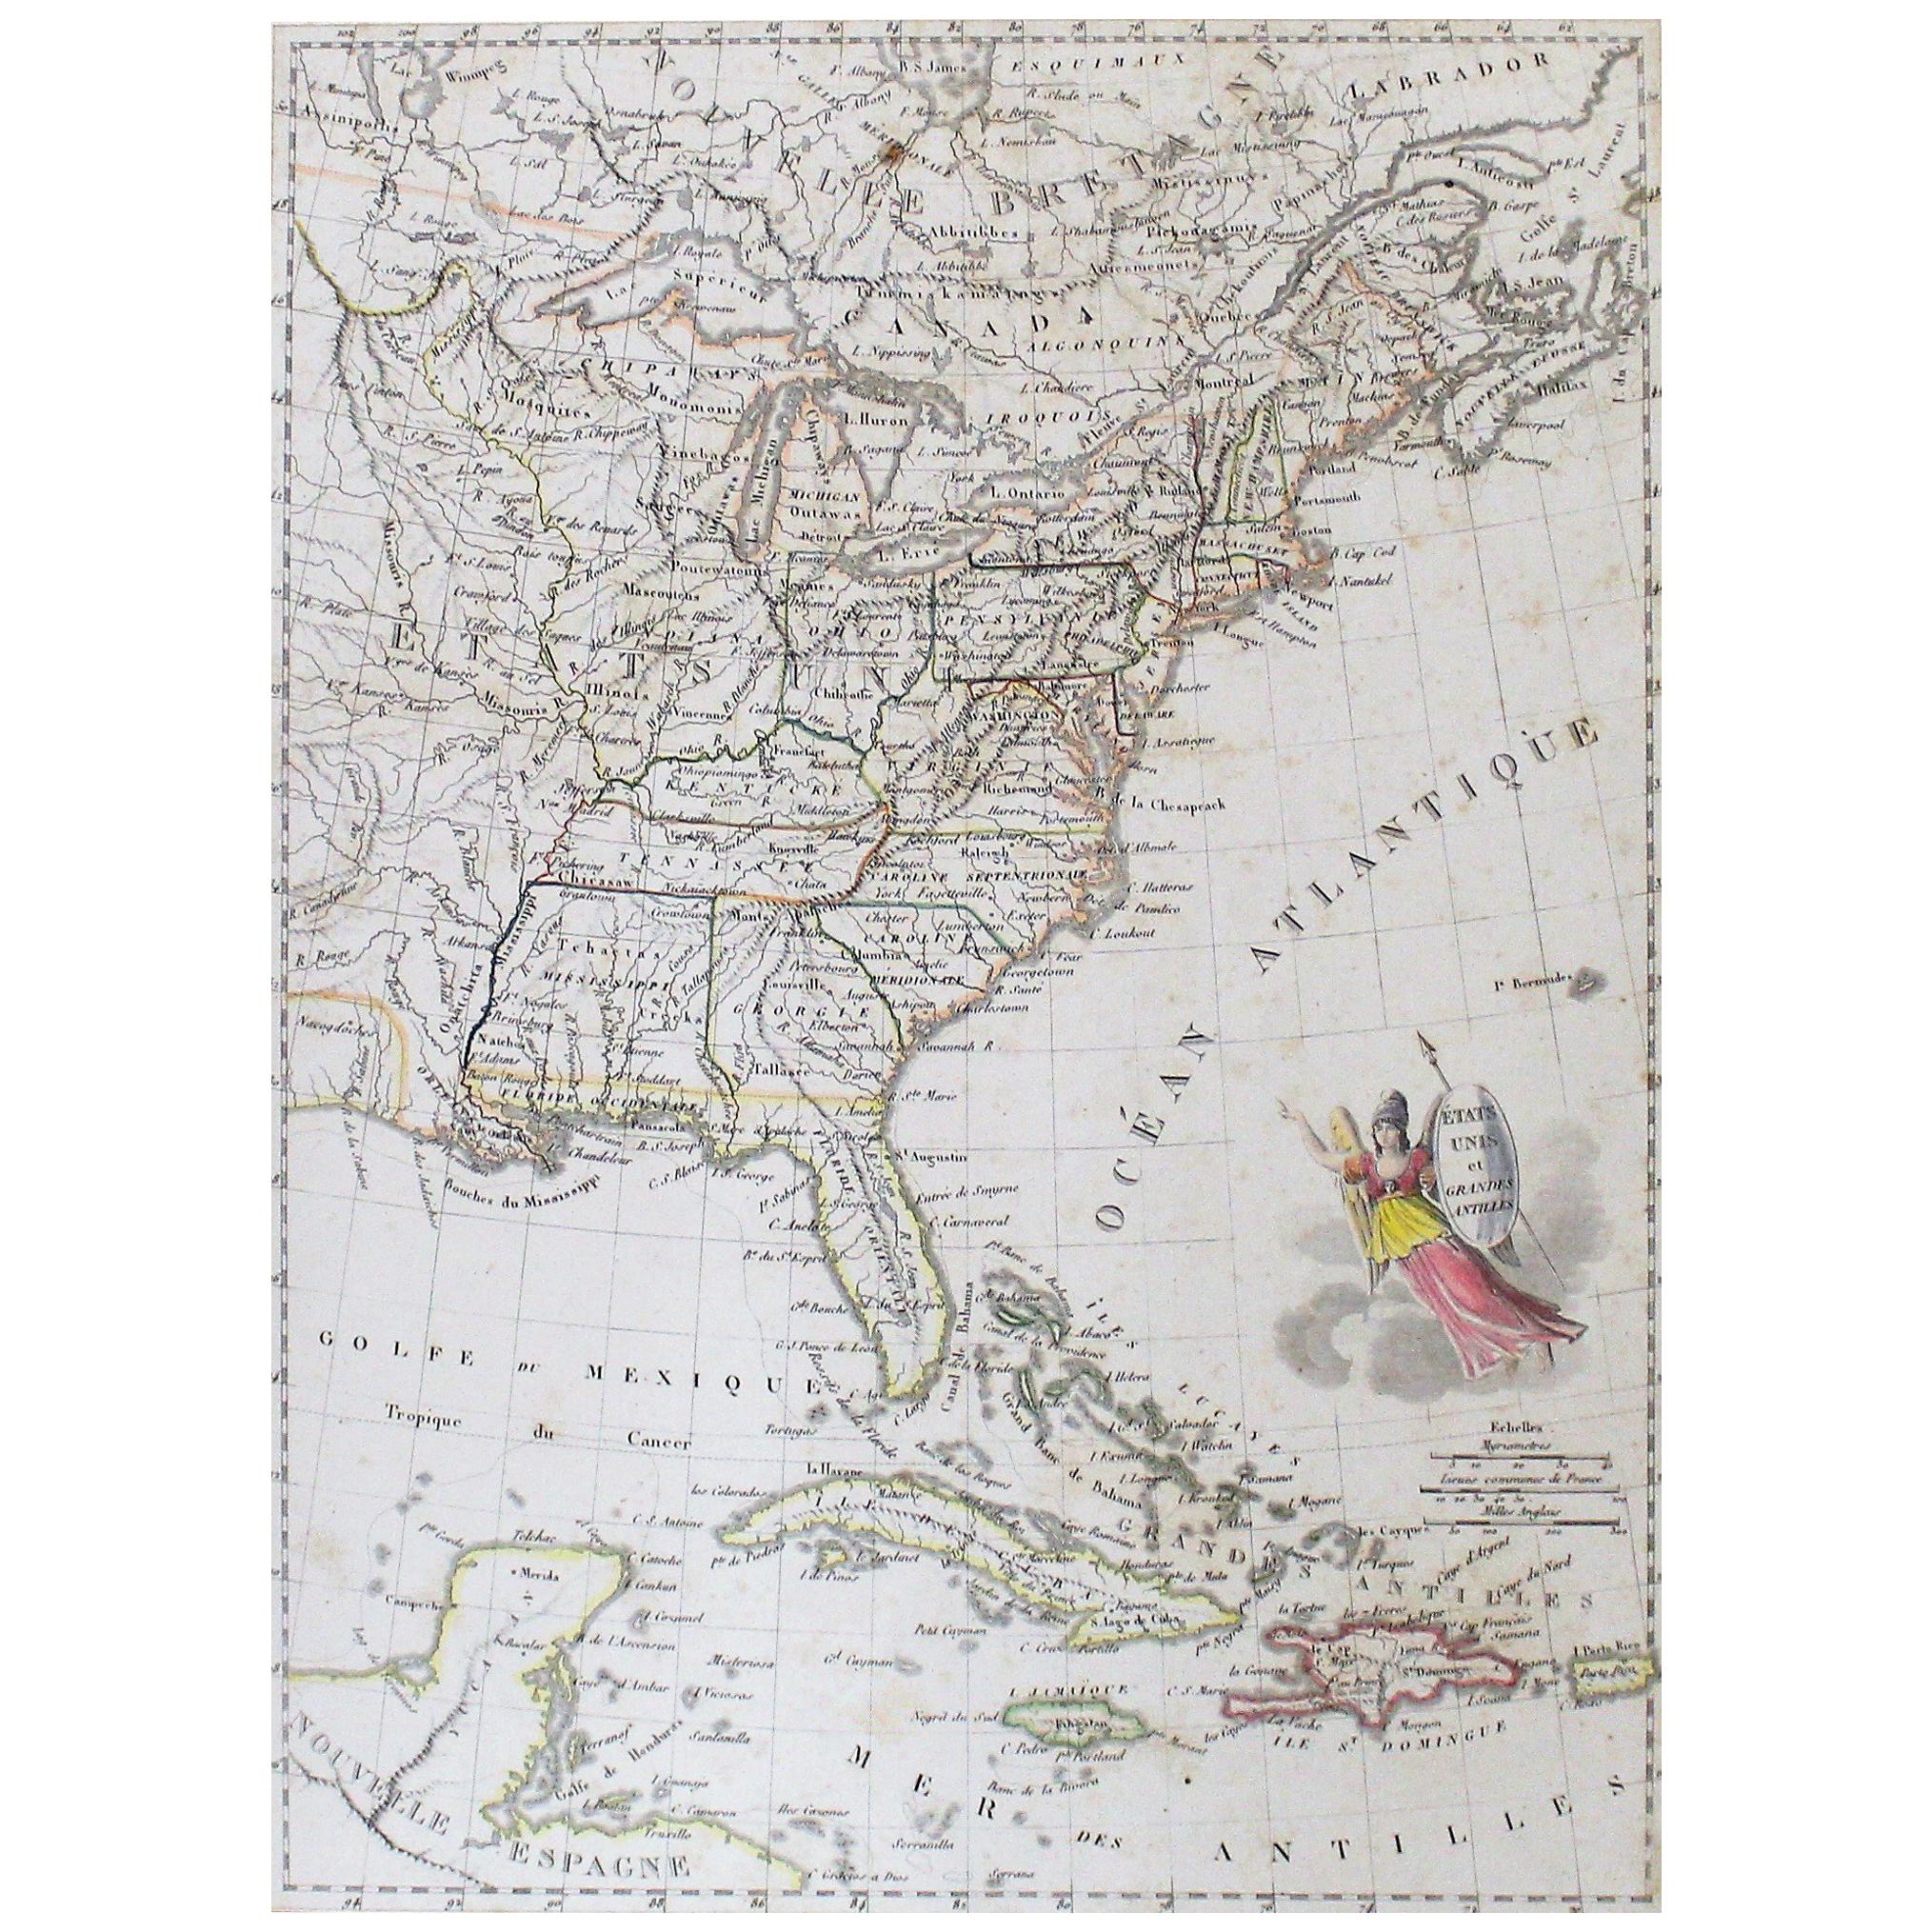 Early 19th Century Hand Colored Map of the United States and Caribbean Islands